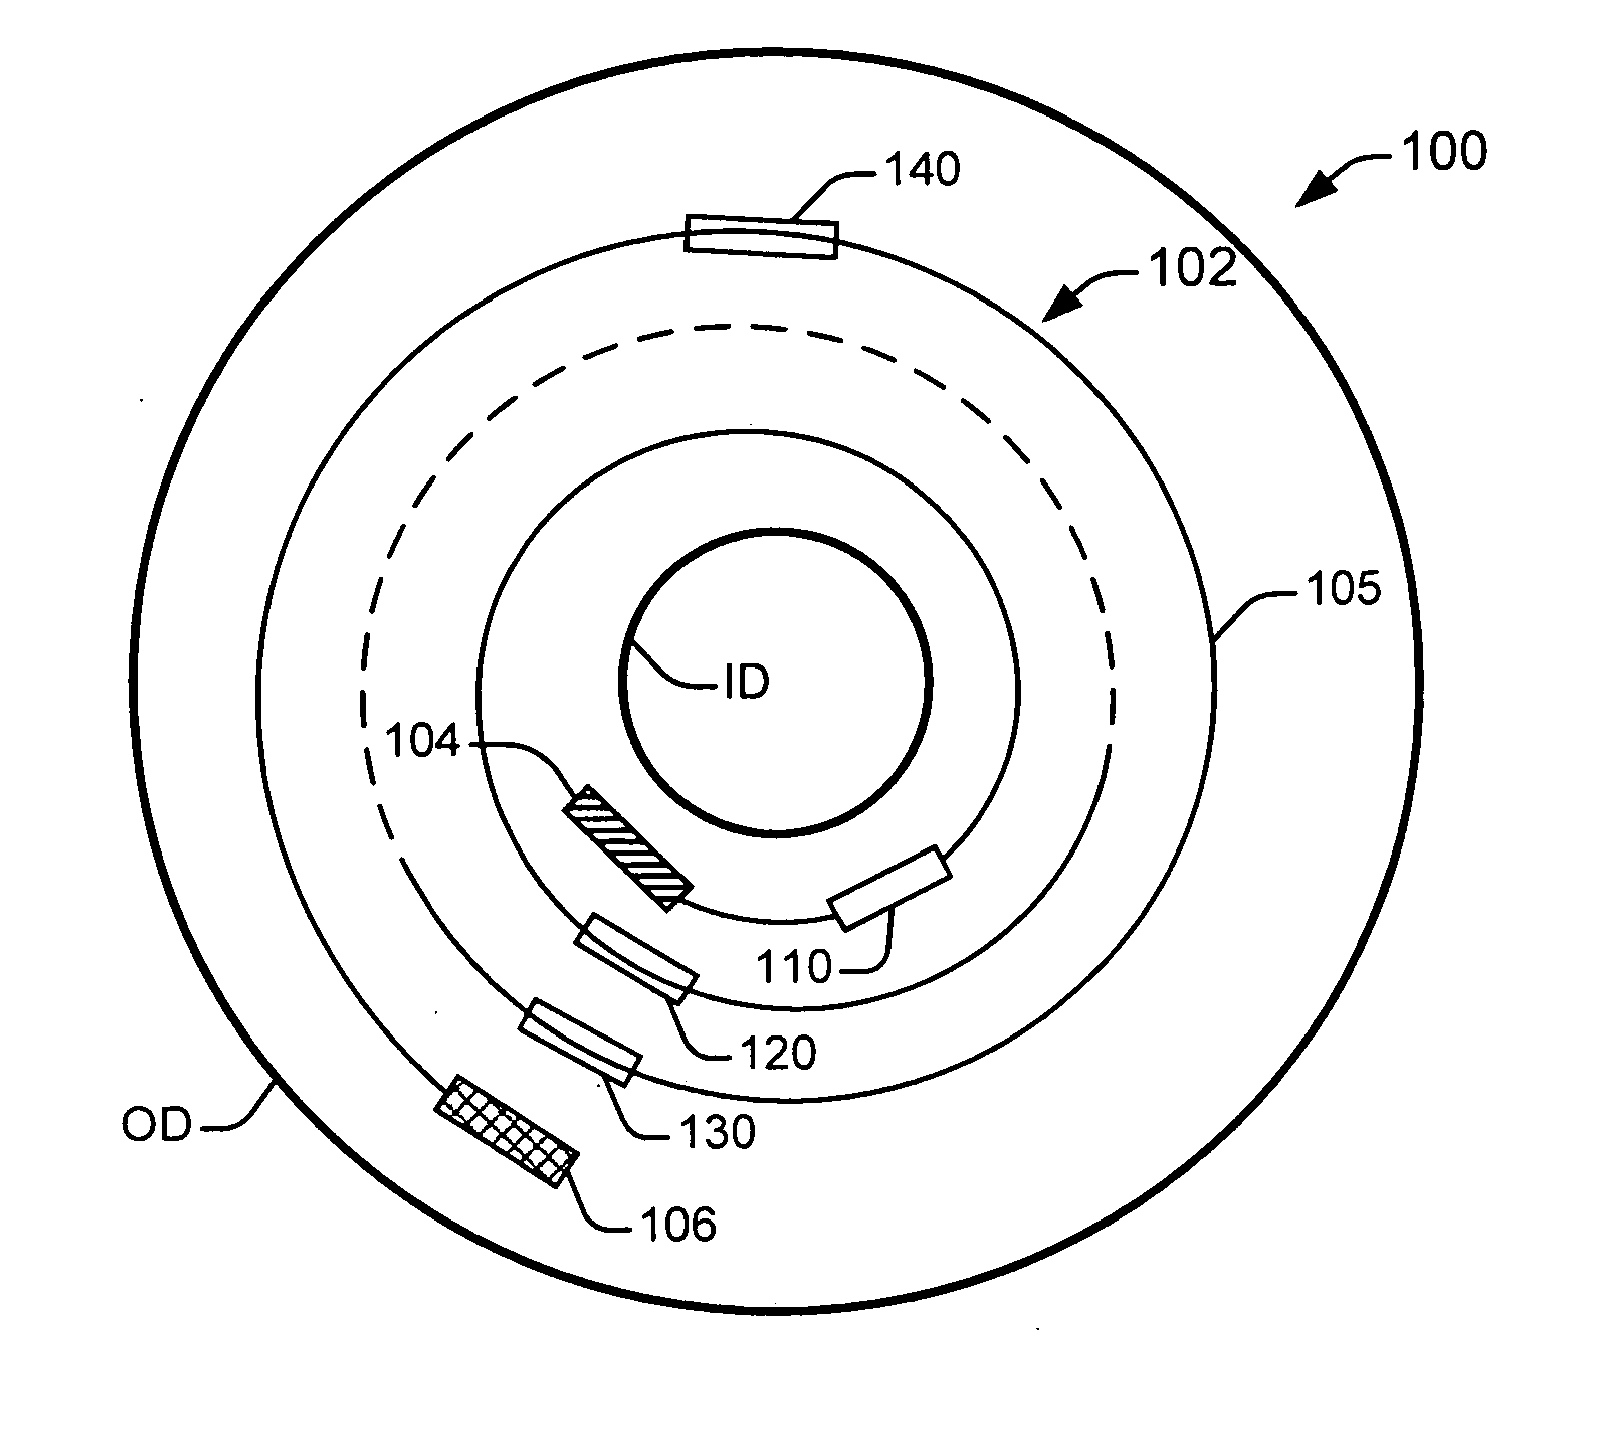 Optical disc with pre-recorded and recordable regions and method of forming the disc